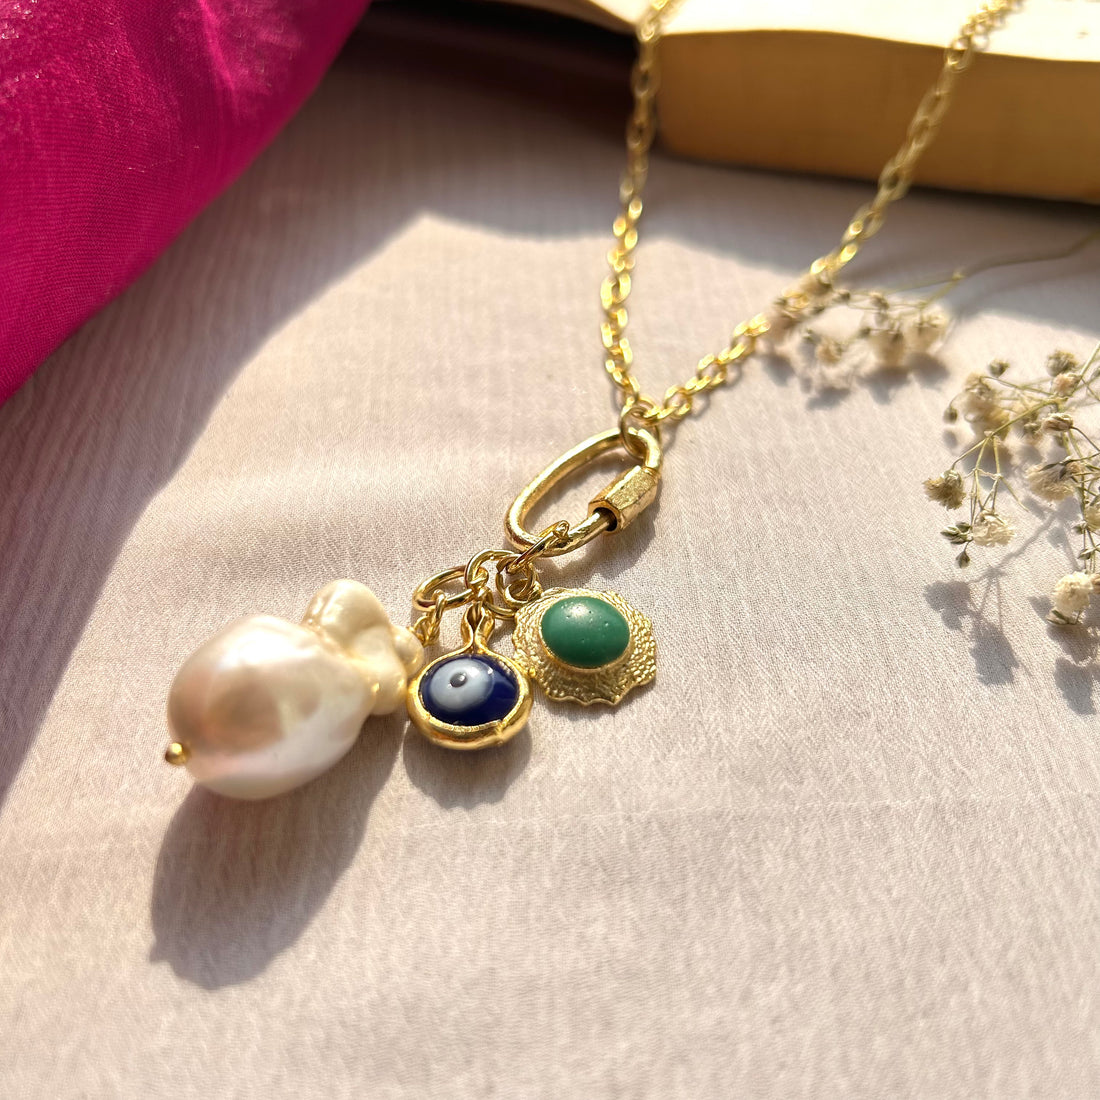 White Opal Charm Necklace